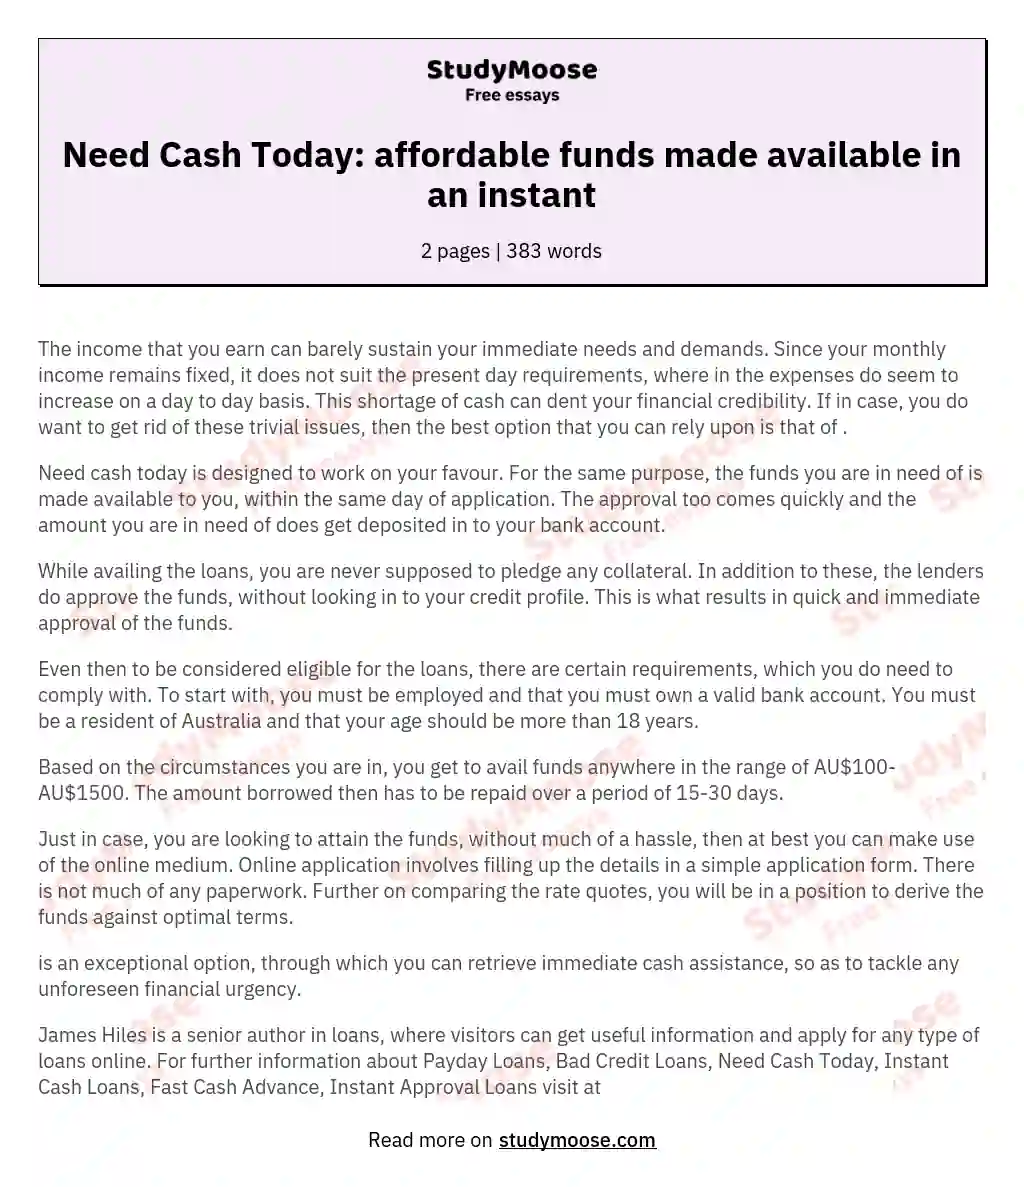 Need Cash Today: affordable funds made available in an instant